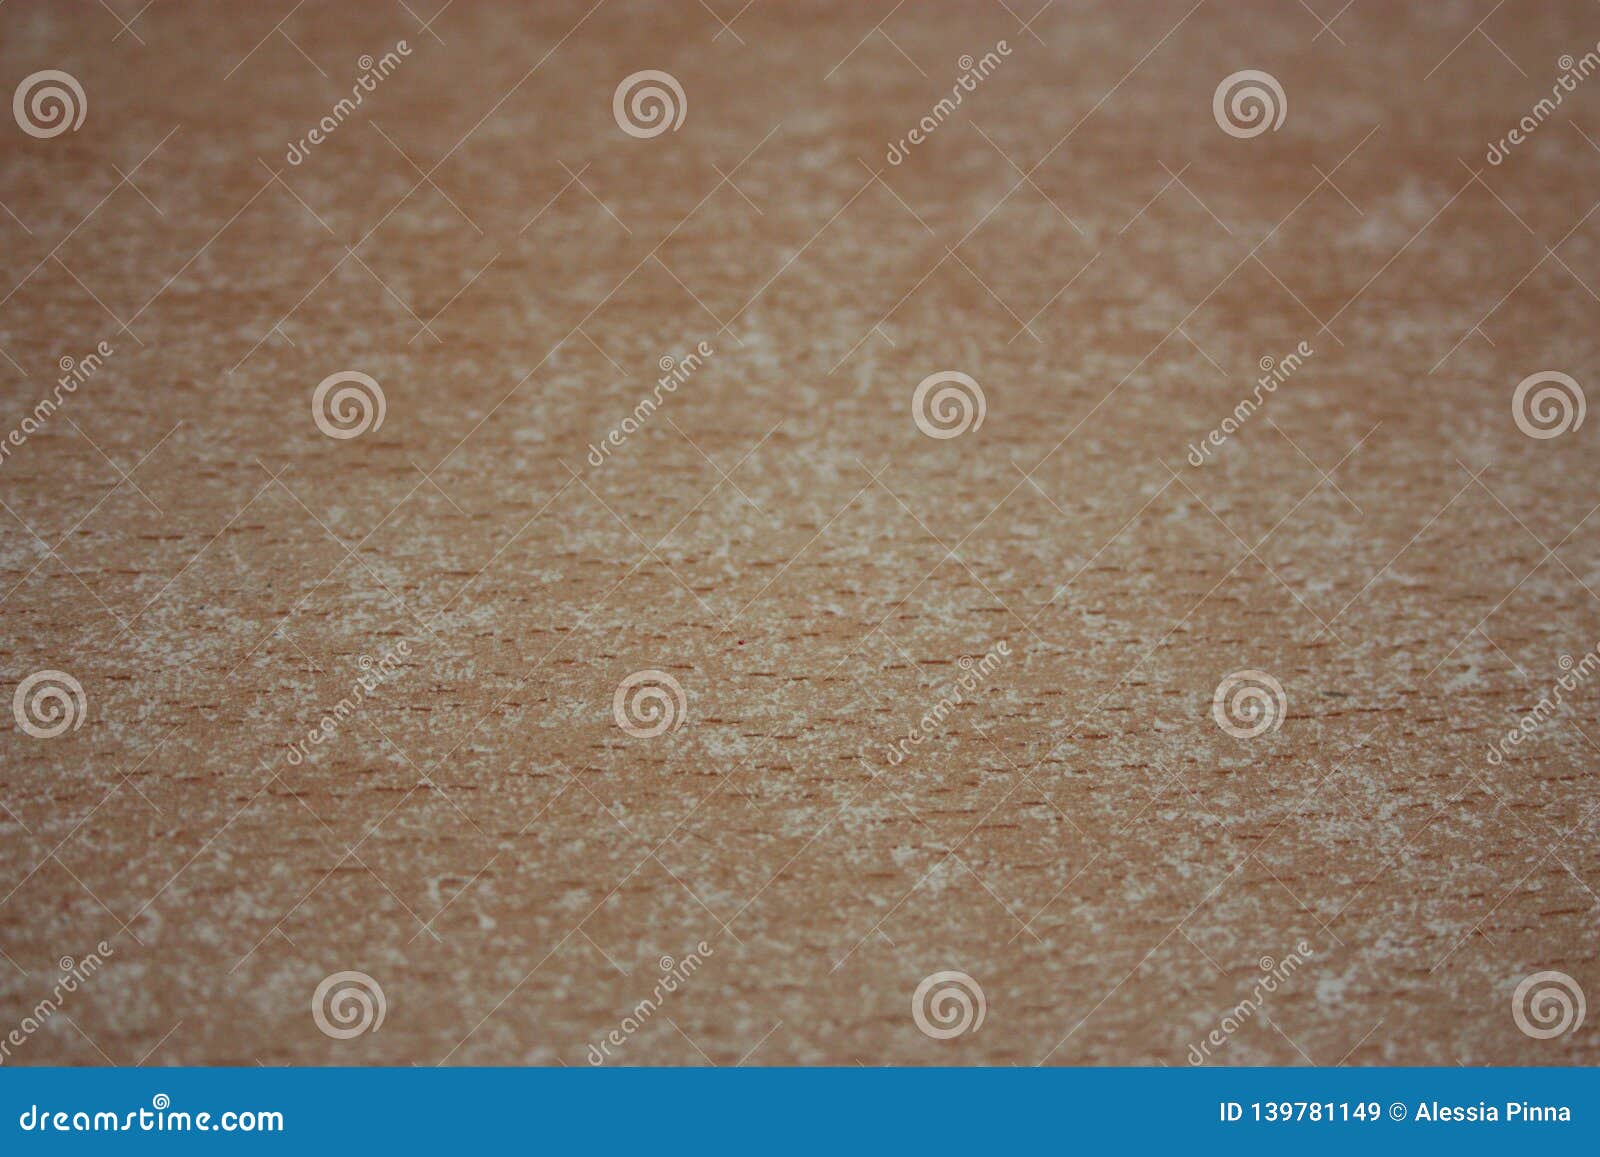 Solid Background. Brown, Beige and White Texture. Nuanced. Fanciful  Illustration of a Plastic Material that Imitates Wood Stock Image - Image  of floor, backdrop: 139781149